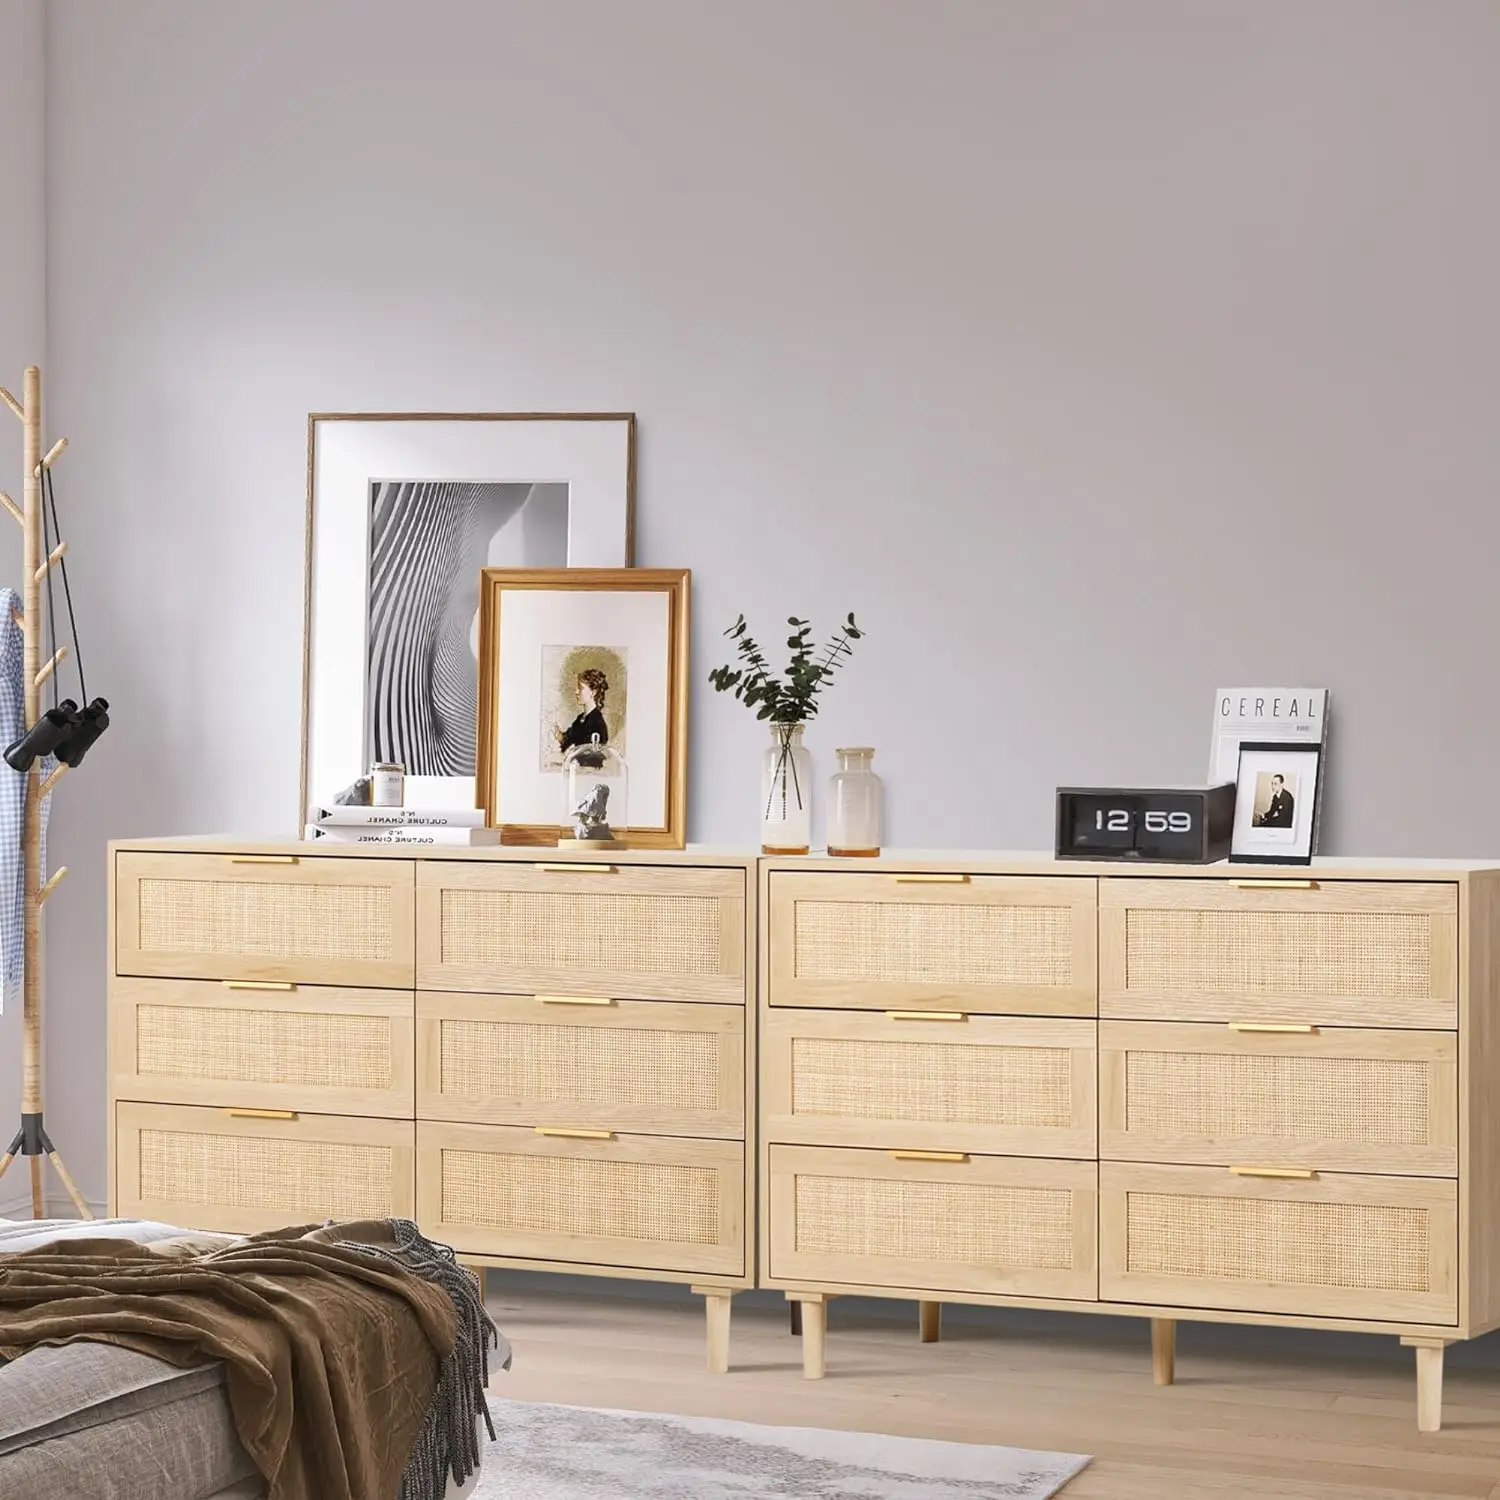 

Rattan Dresser for Bedroom, Modern 6 Drawer Double Dresser with Gold Handles, Wood Storage Chest of Drawers for Bedroom,Hallway